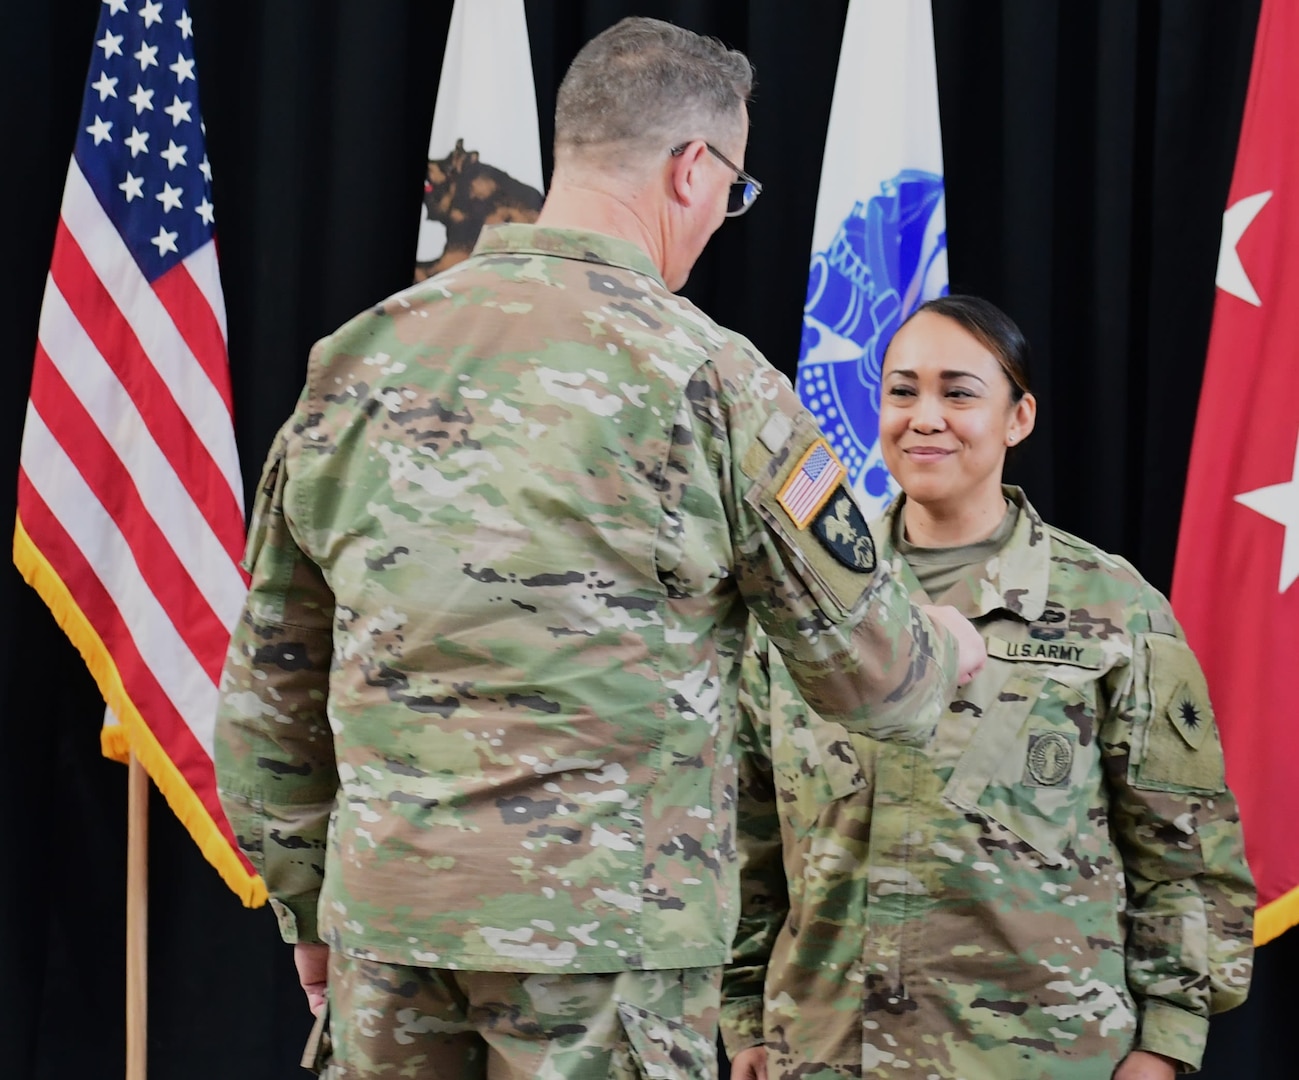 Maj. Gen. Matthew P. Beevers, the acting adjutant general of the California National Guard, pins the rank of brigadier general to Brig. Gen. Marlena A. DeCelle's uniform at her promotion ceremony in Sacramento, California, Jan. 26, 2023.